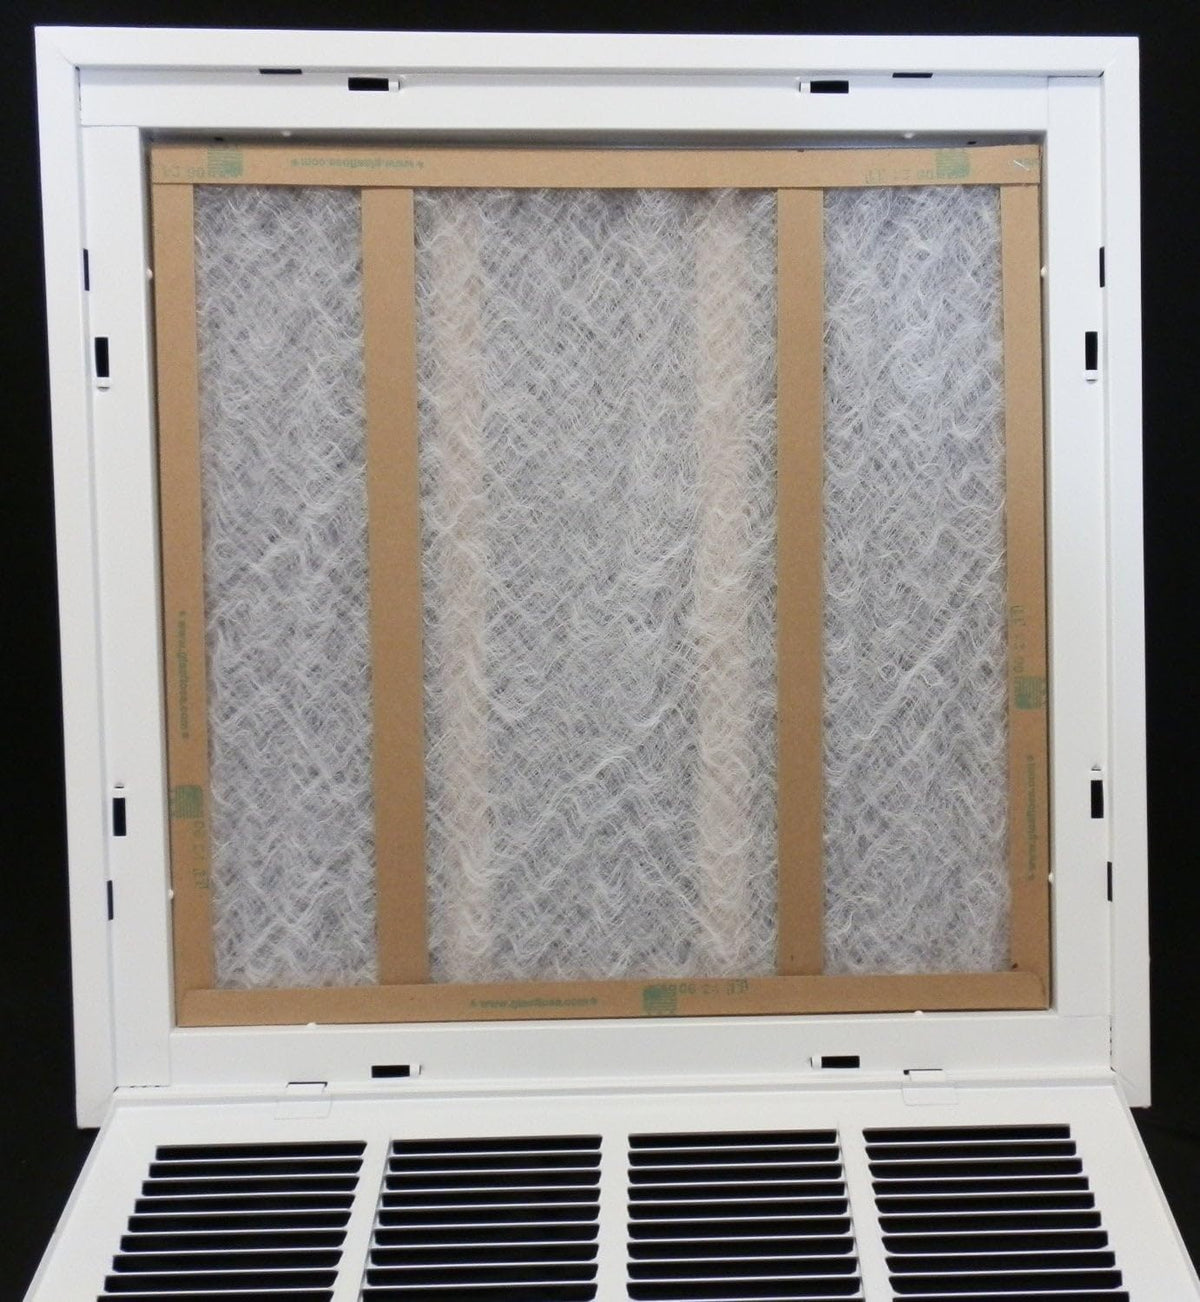 10&quot; X 6&quot; Steel Return Air Filter Grille for 1&quot; Filter - Removable Frame - [Outer Dimensions: 12 5/8&quot; X 8 5/8&quot;]